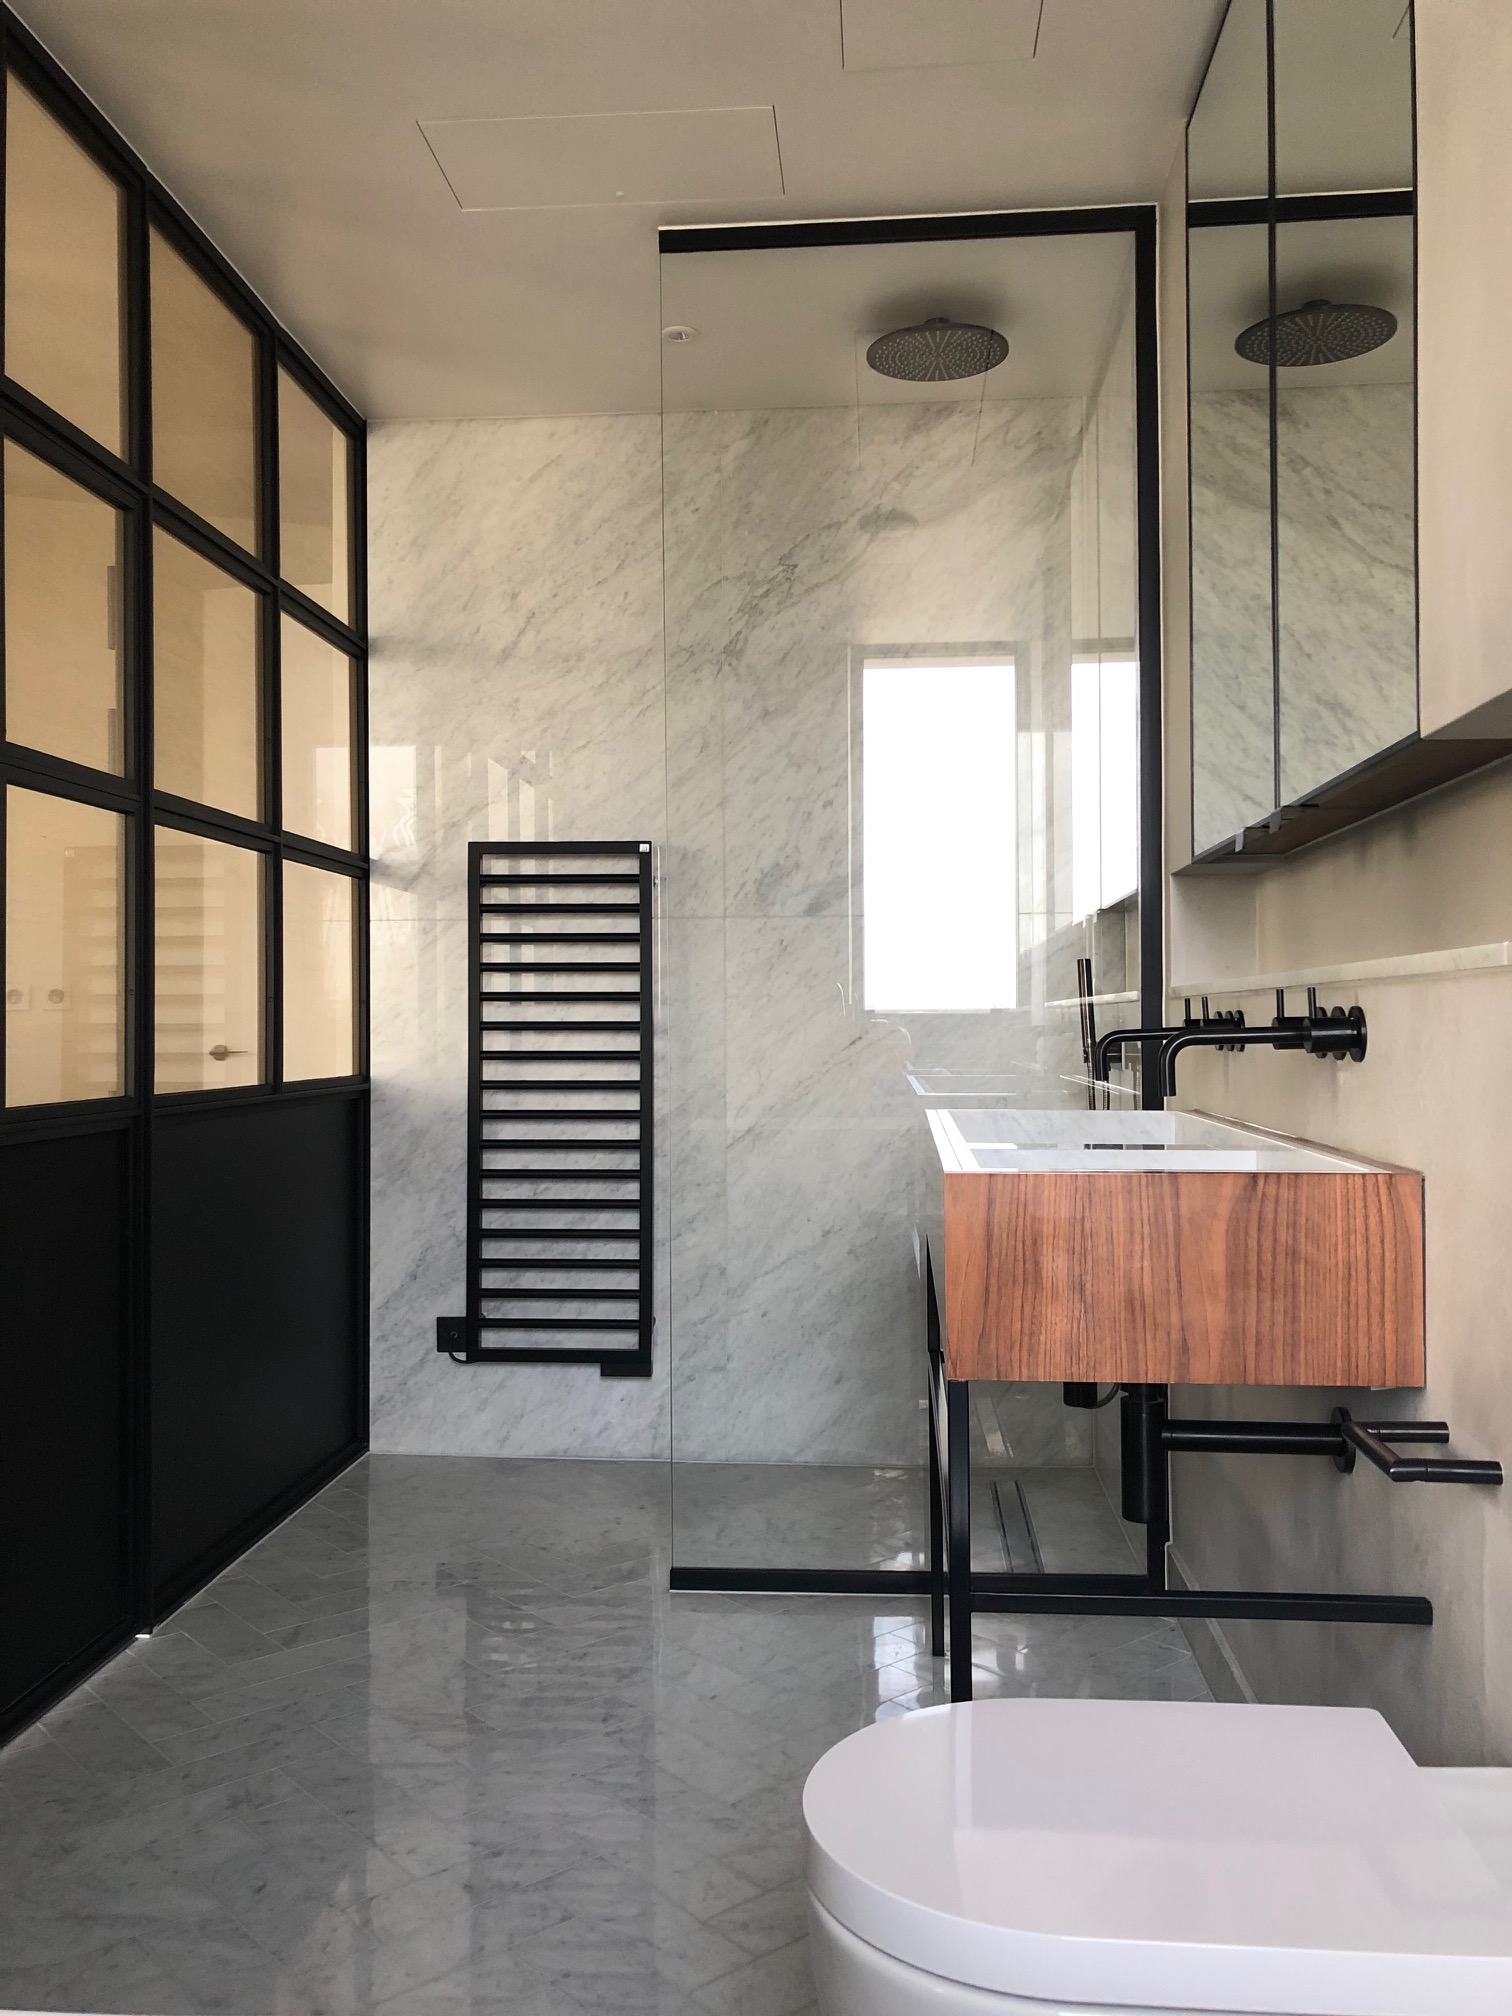 Custom Made Crittall Style Shower Enclosures, Screens | Kp Glass & Glazing